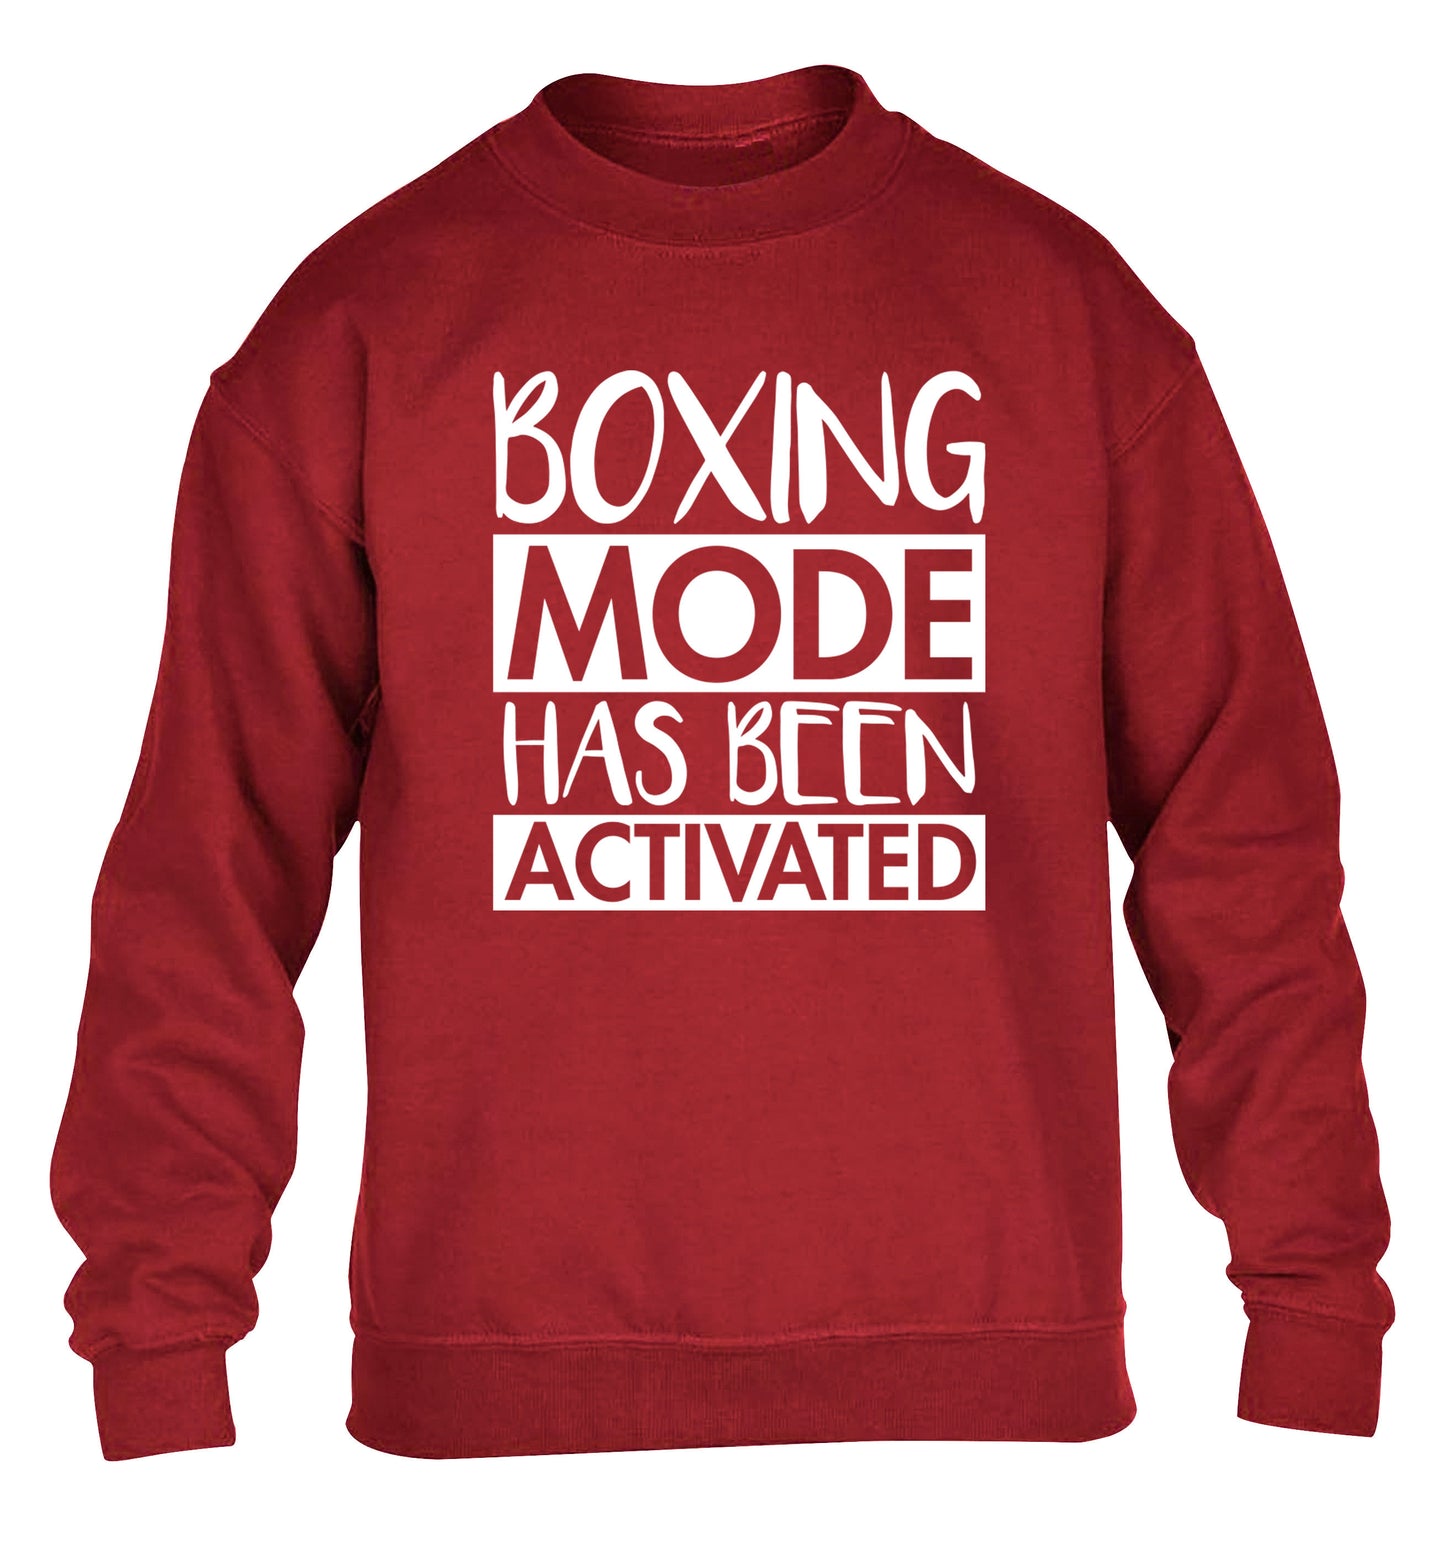 Boxing mode activated children's grey sweater 12-14 Years